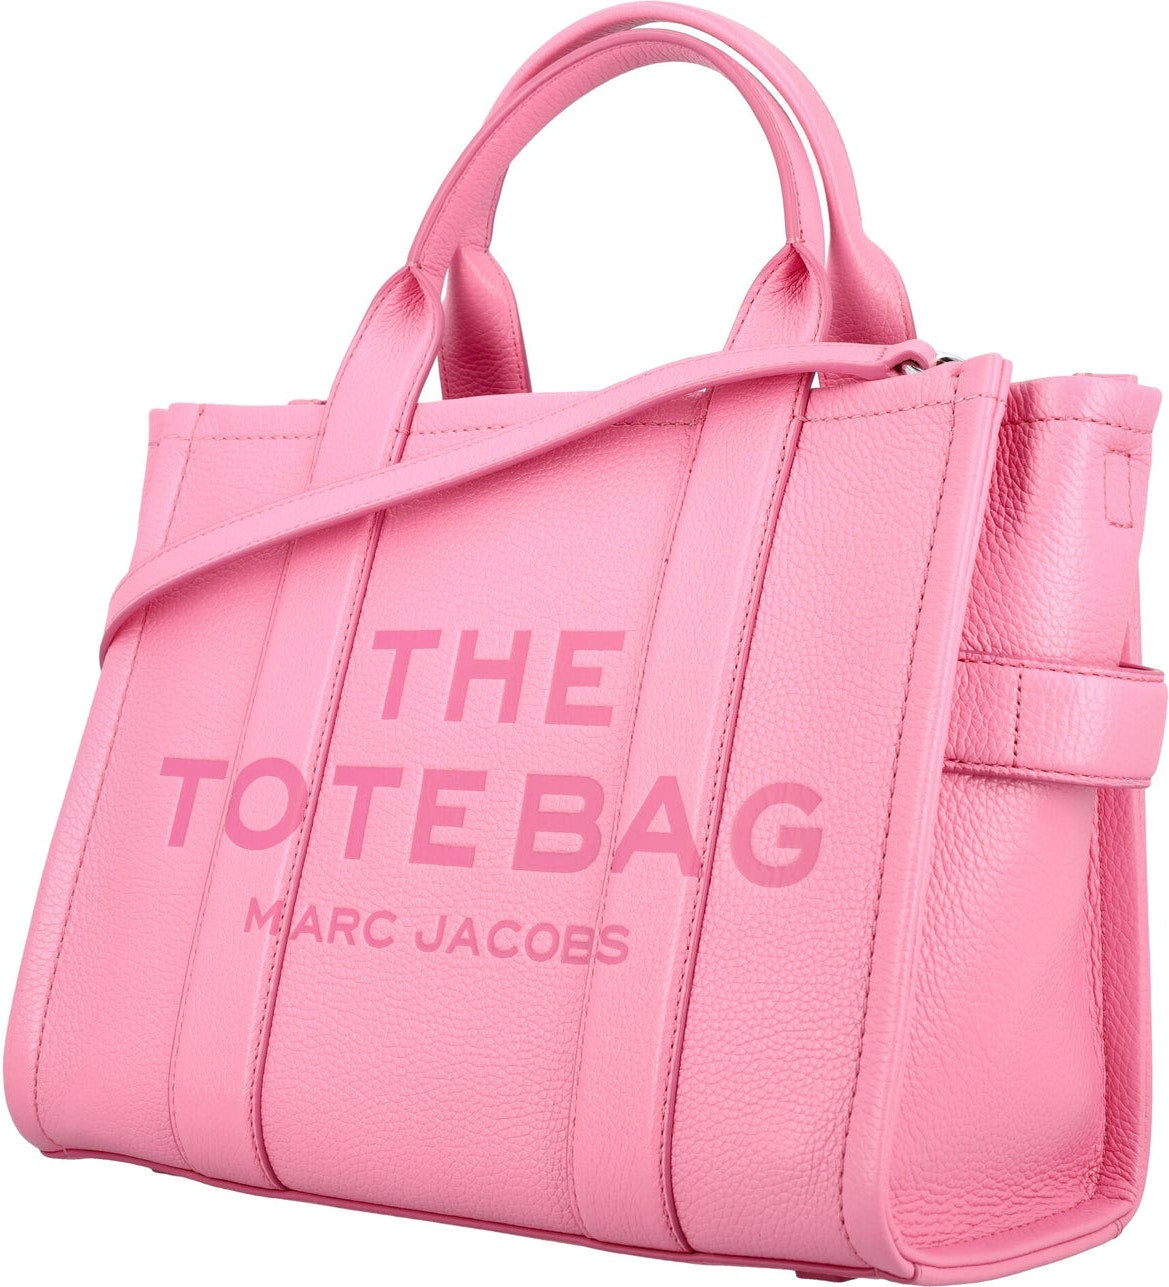 Buy Marc Jacobs The Leather Tote Bag Medium in Pakistan